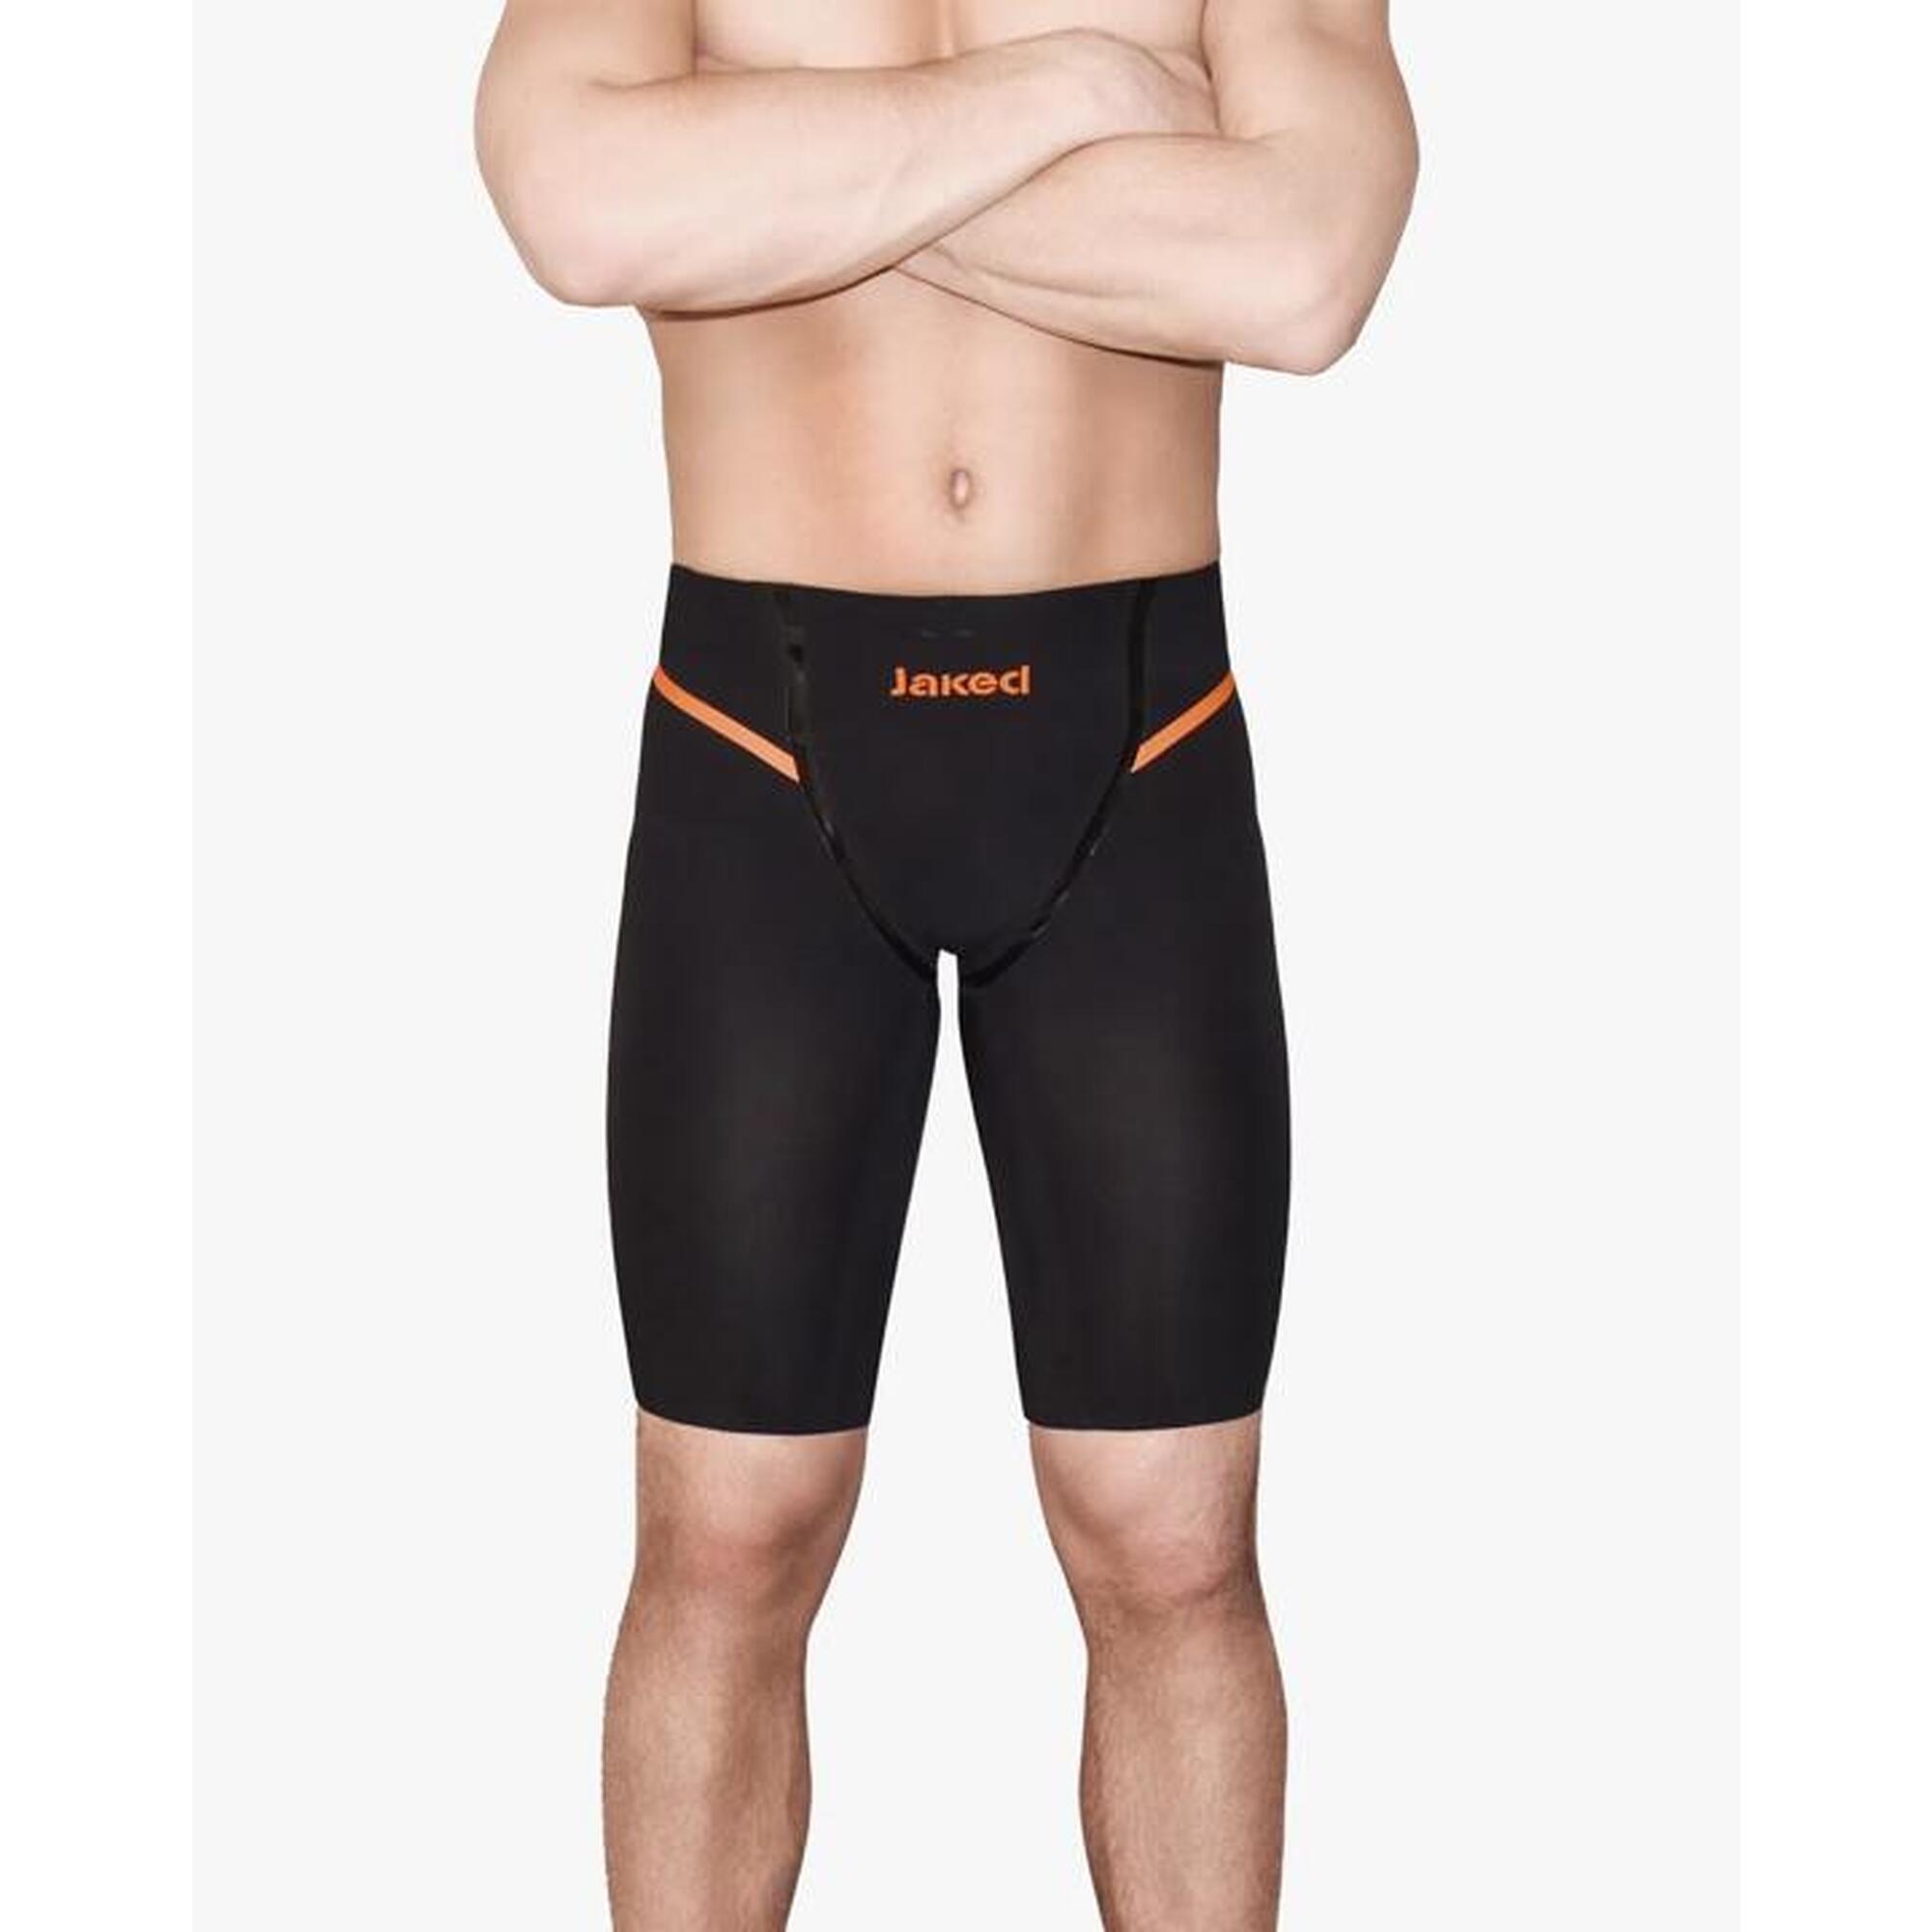 JKRONO FINA Approved Men's Competition Swimsuit - Black